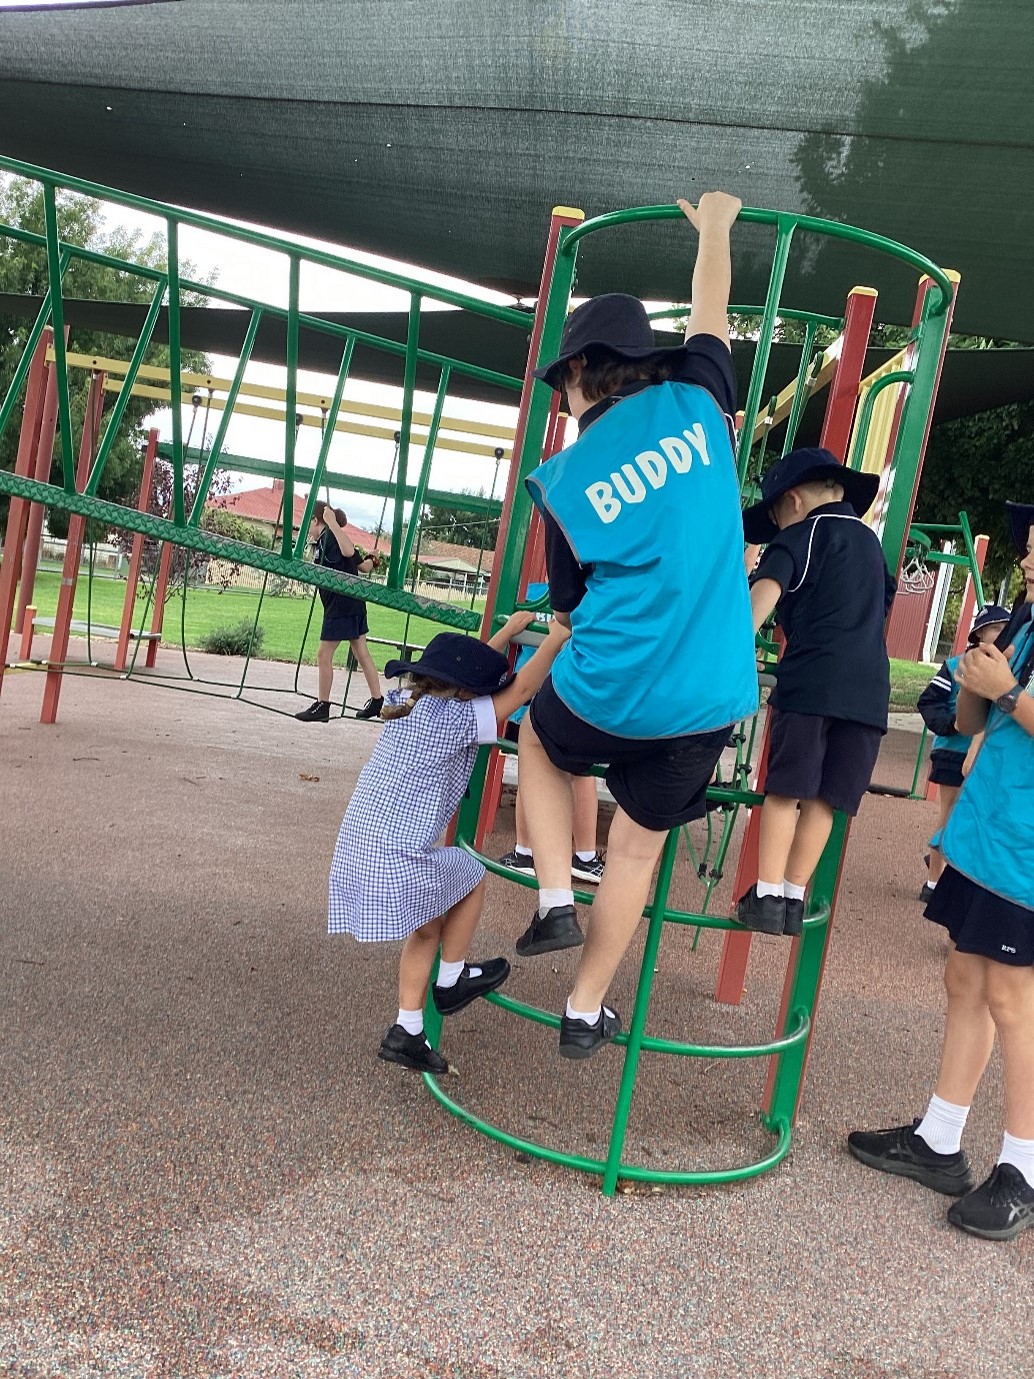 Buddy playing with Foundation student on the playground.